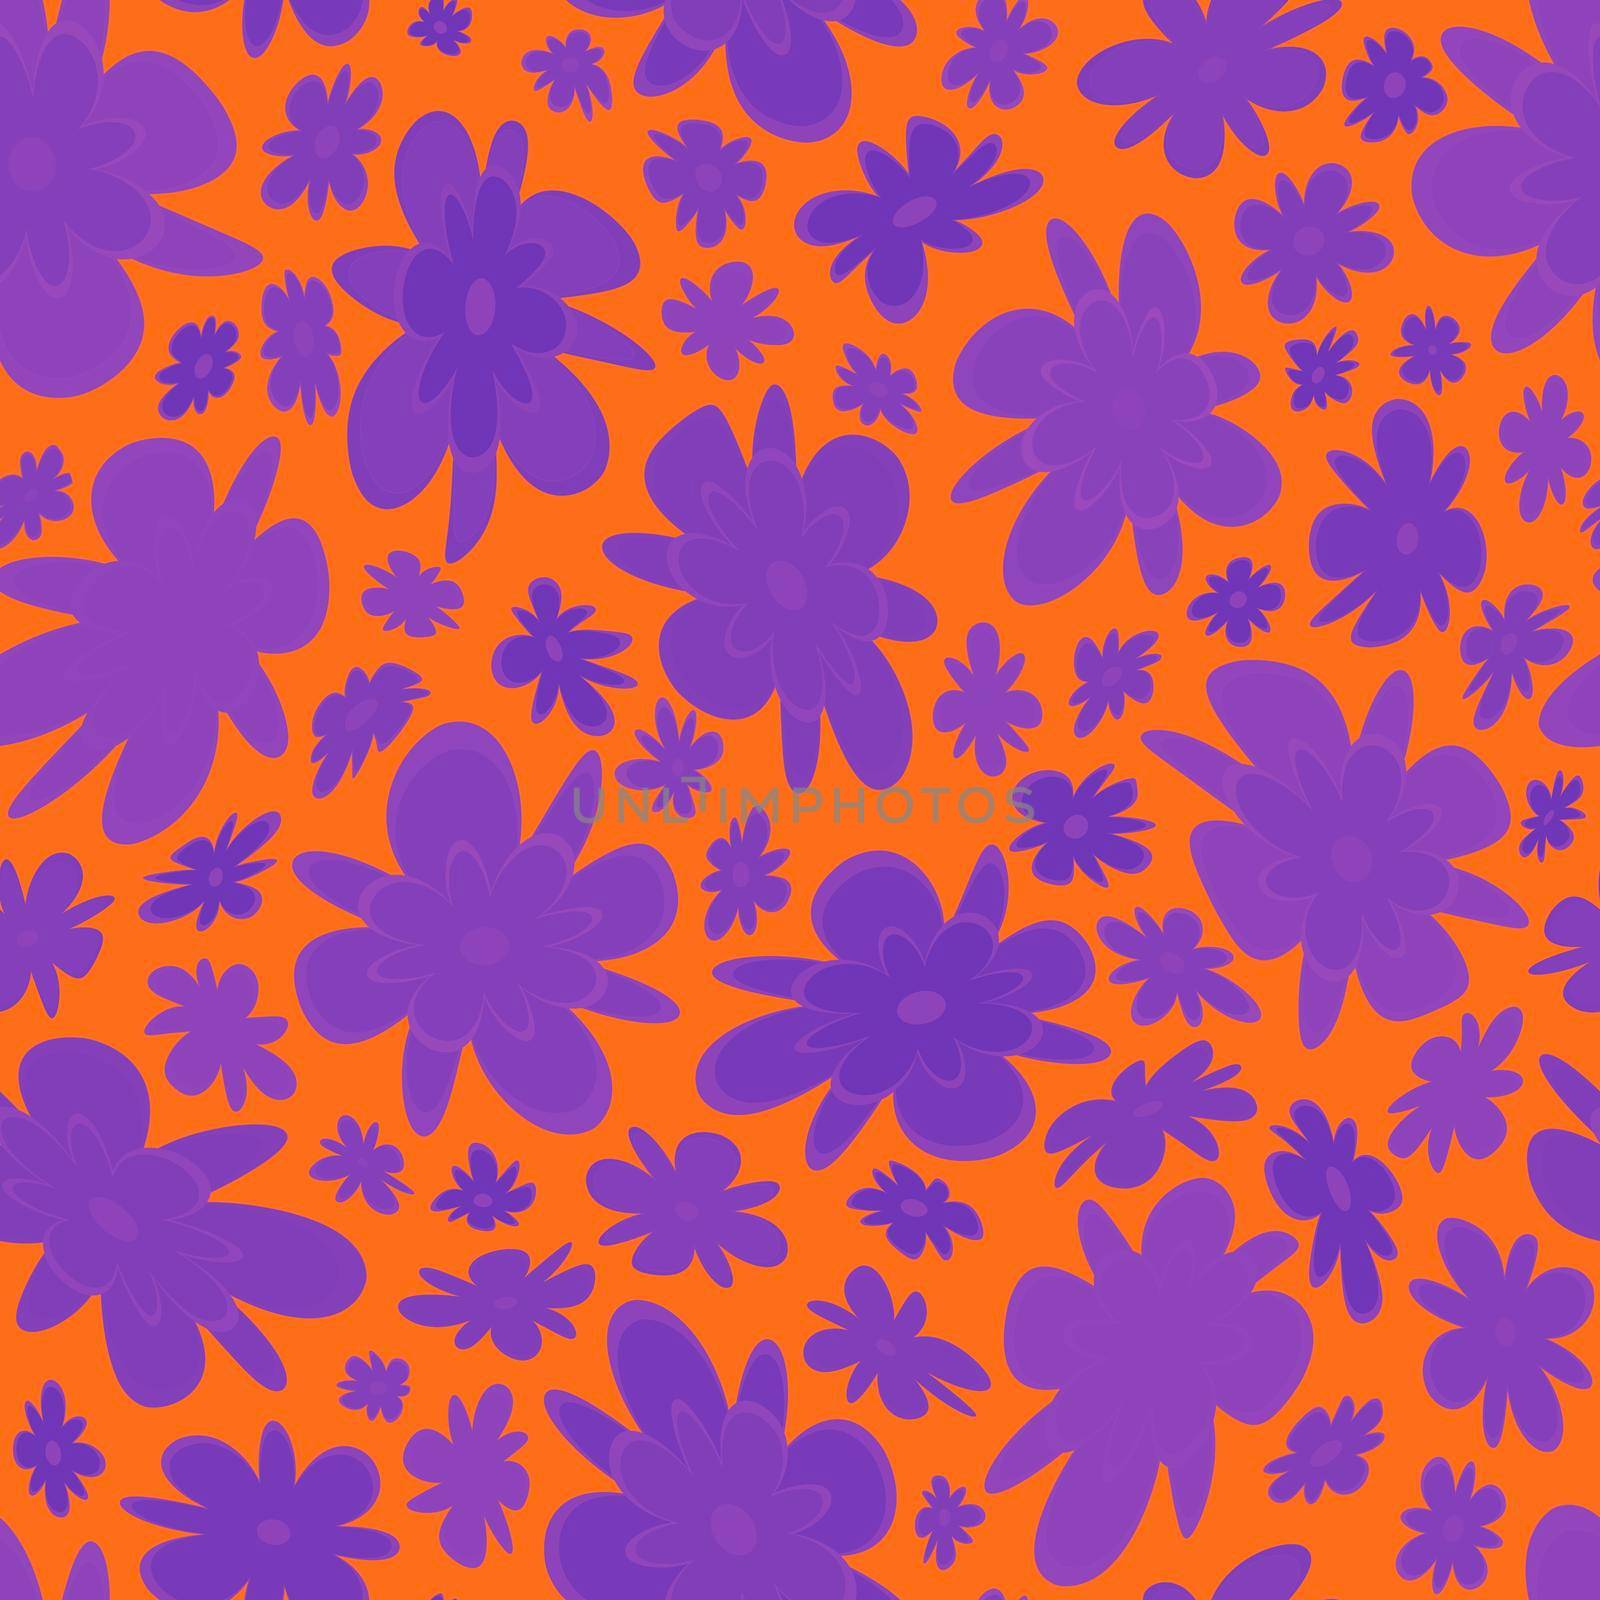 Trendy fabric pattern with miniature flowers.Summer print.Fashion design.Motifs scattered random.Elegant template for fashion prints.Good for fashion,textile,fabric,gift wrapping paper.Orange lilac.